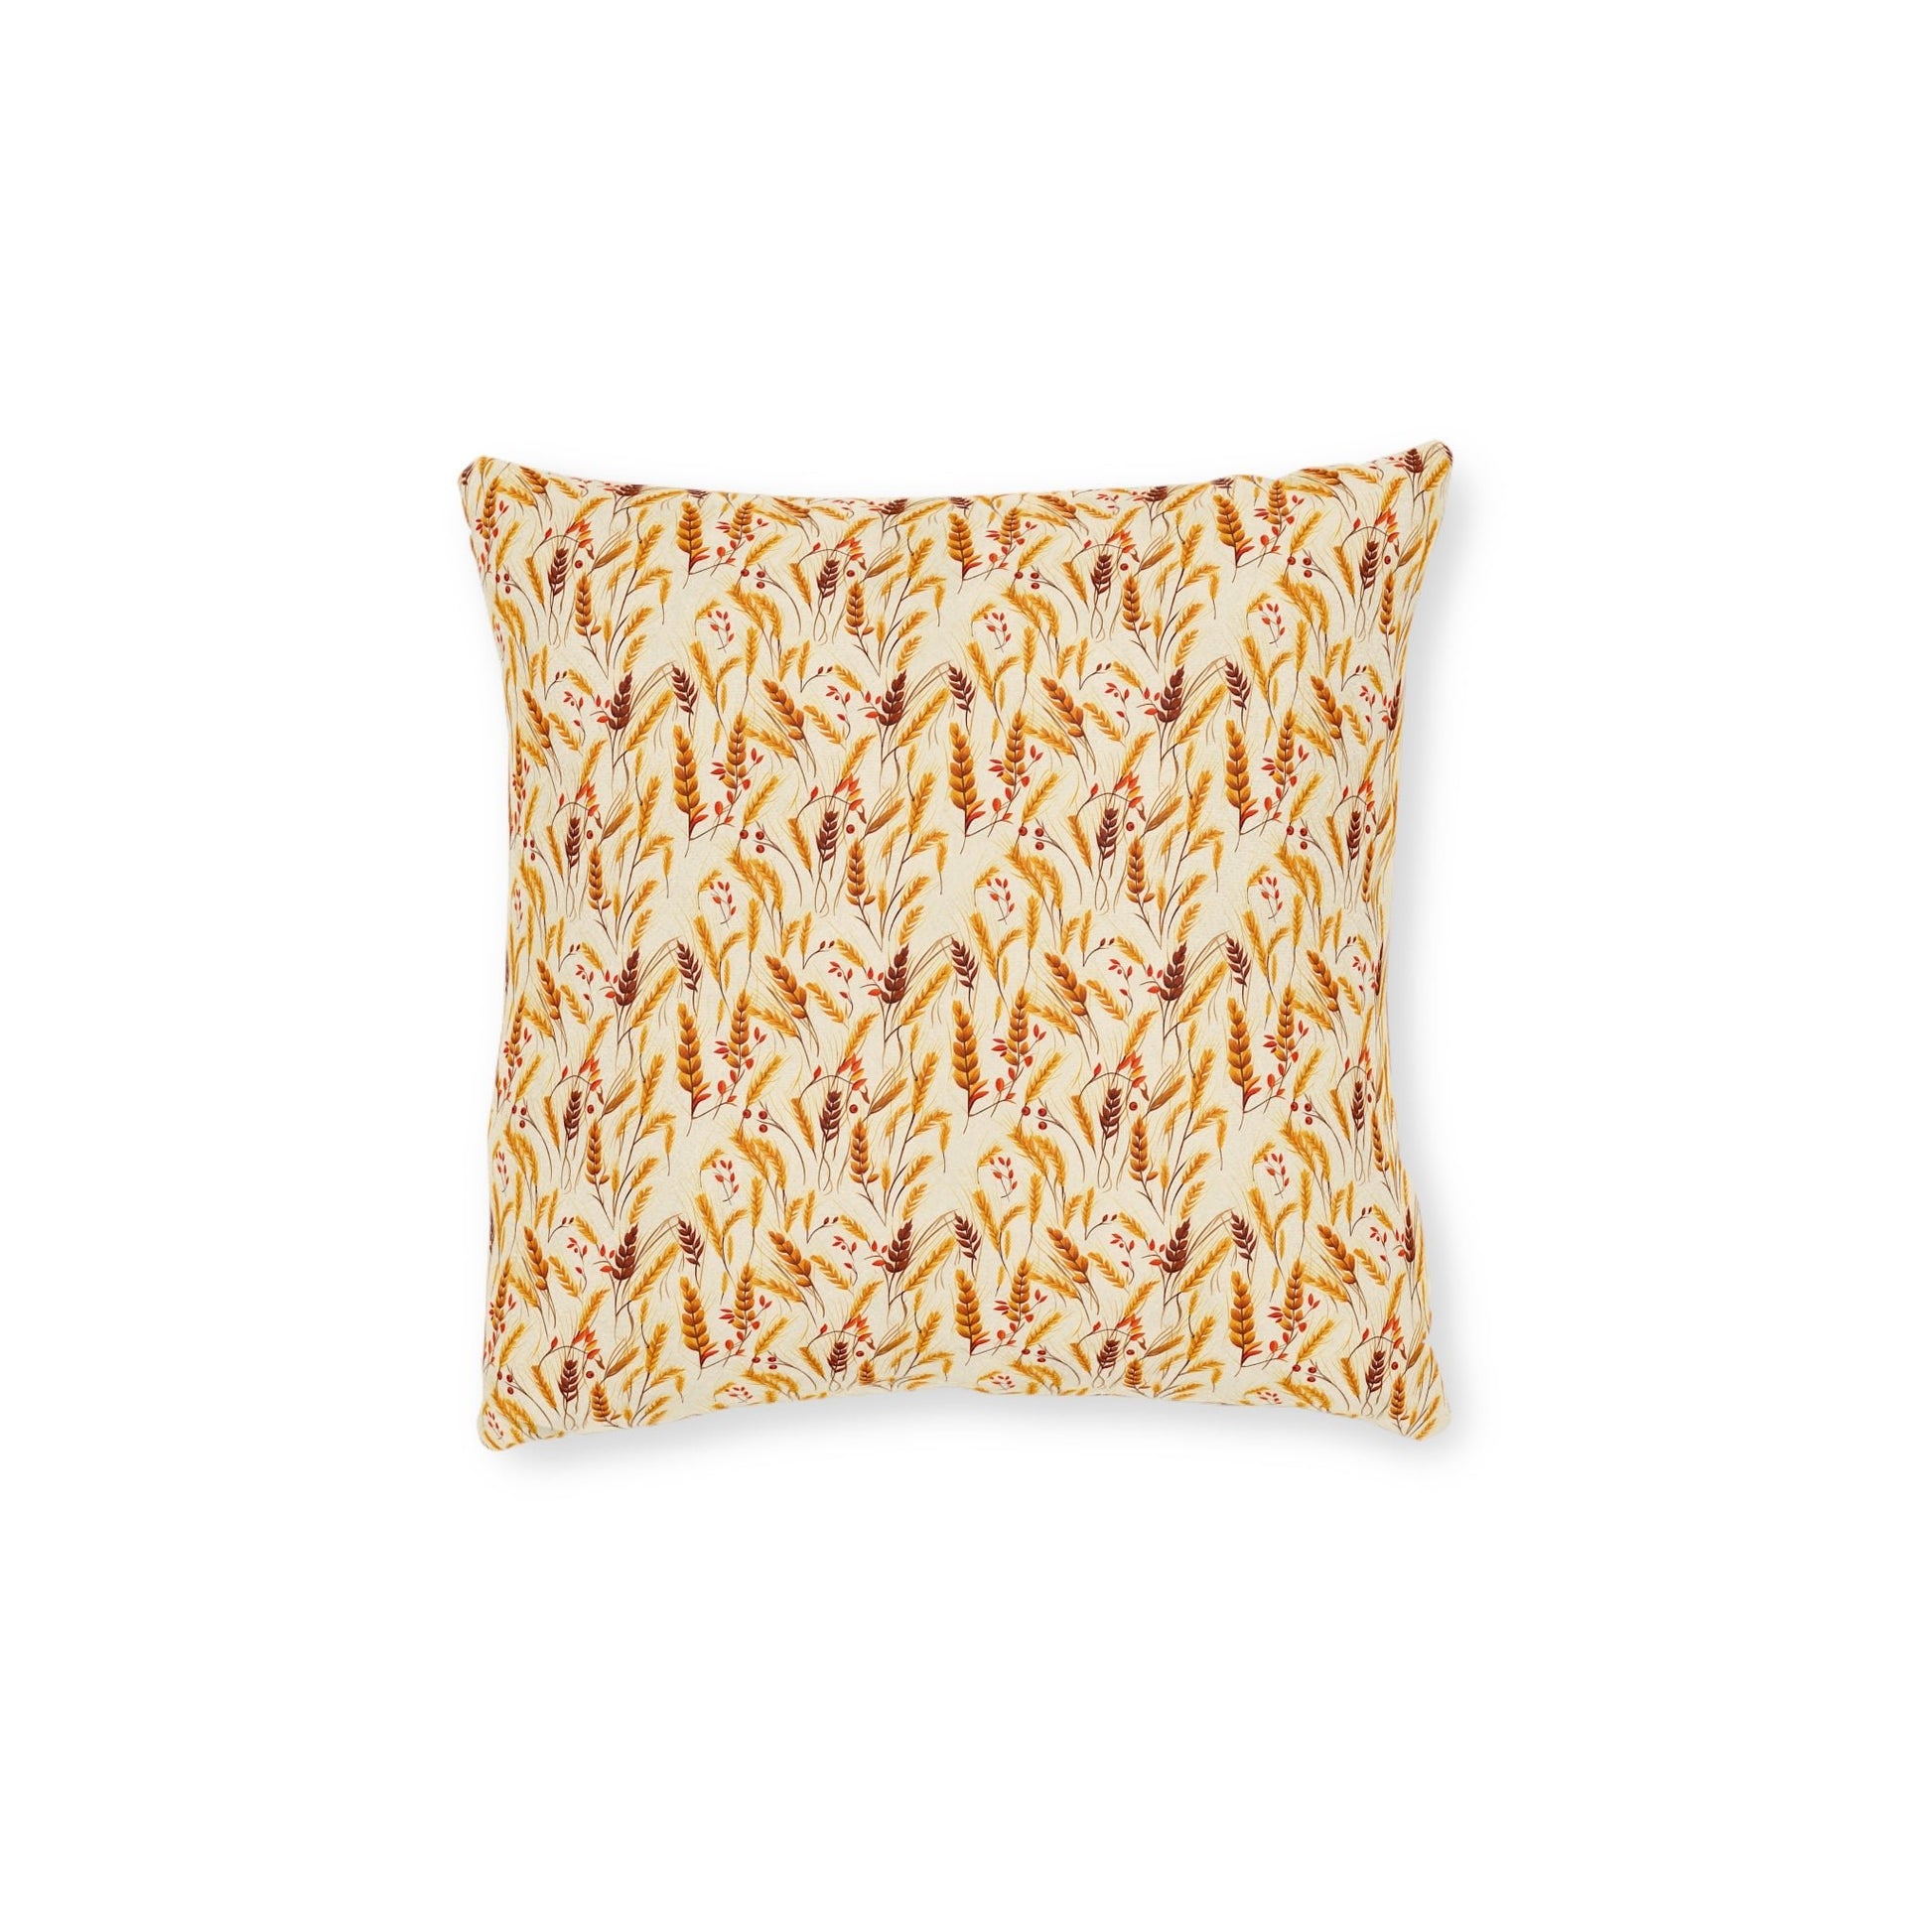 Golden Harvest: An Autumn Collage of Wheat and Berries - Square Pillow - Pattern Symphony